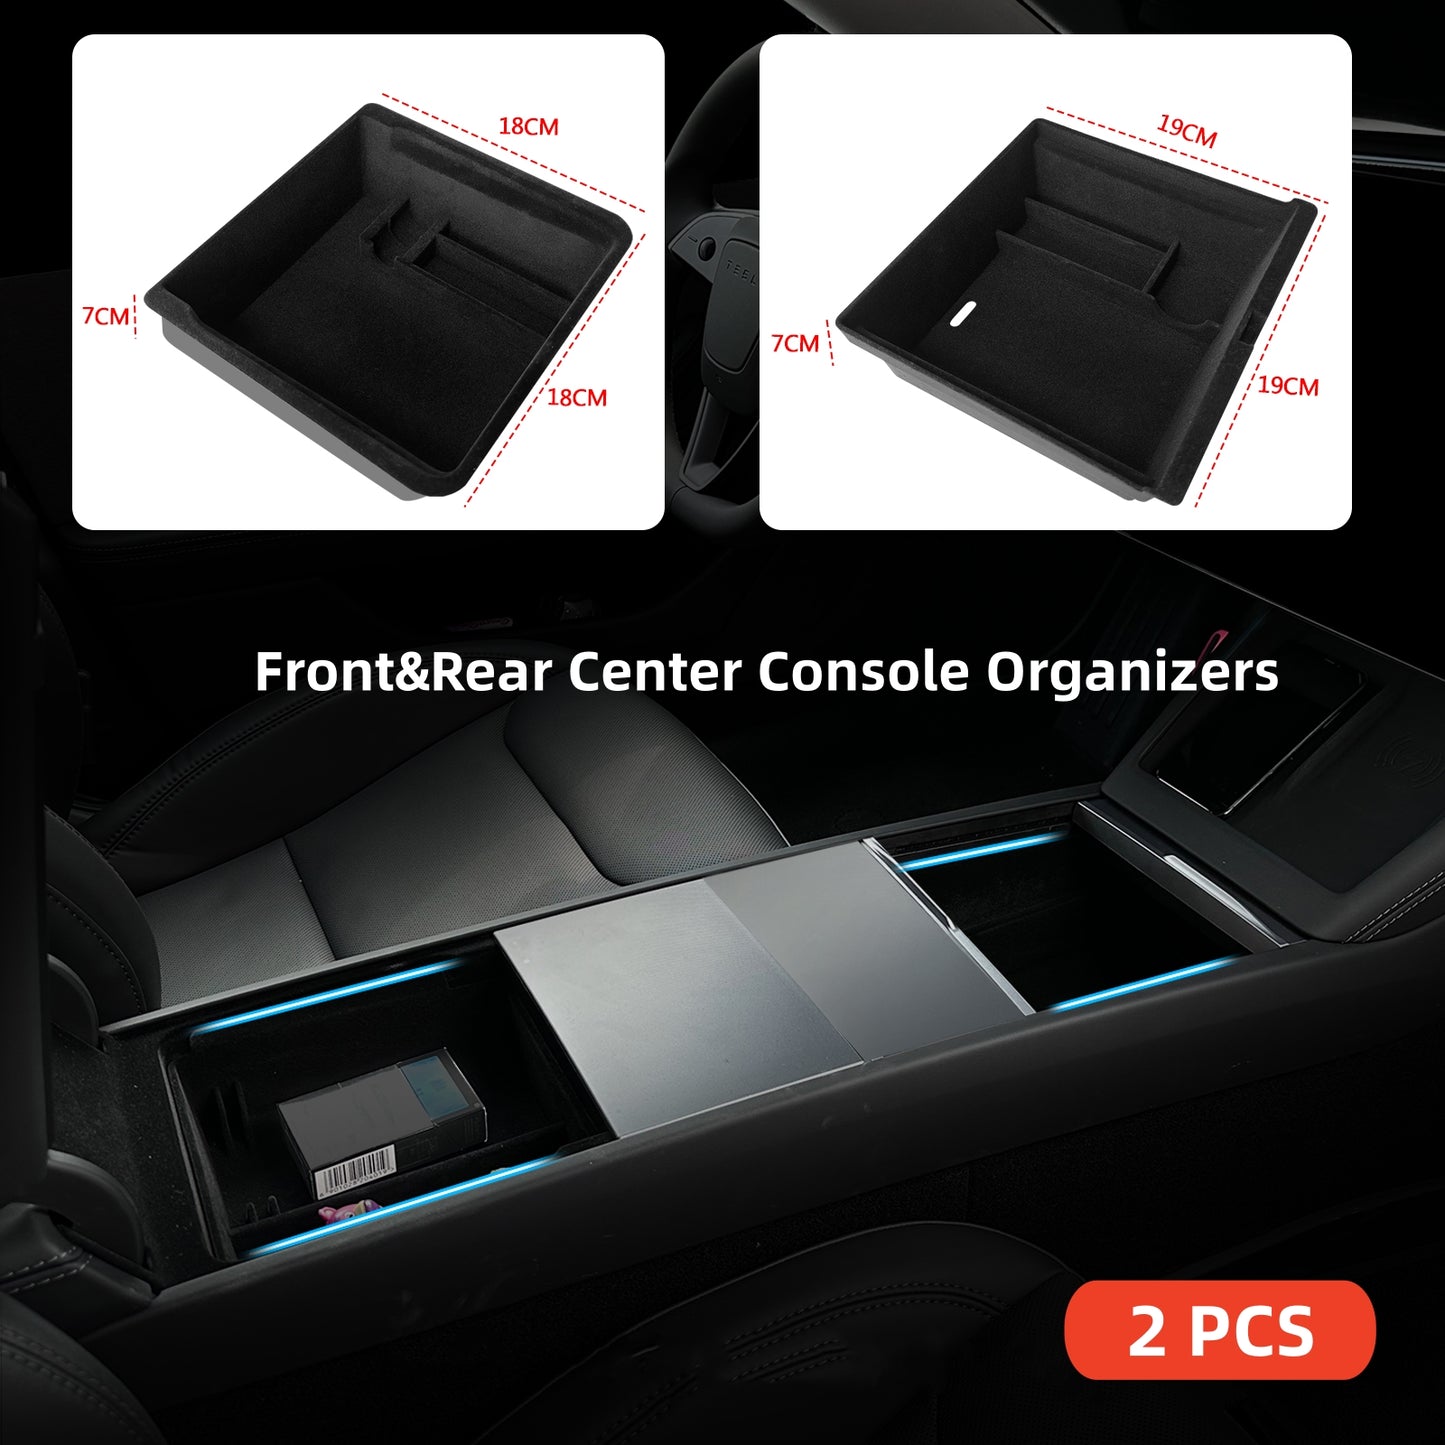 Center Console Organizer Tray Flocked Car Accessories Set for Tesla Mo –  Arcoche